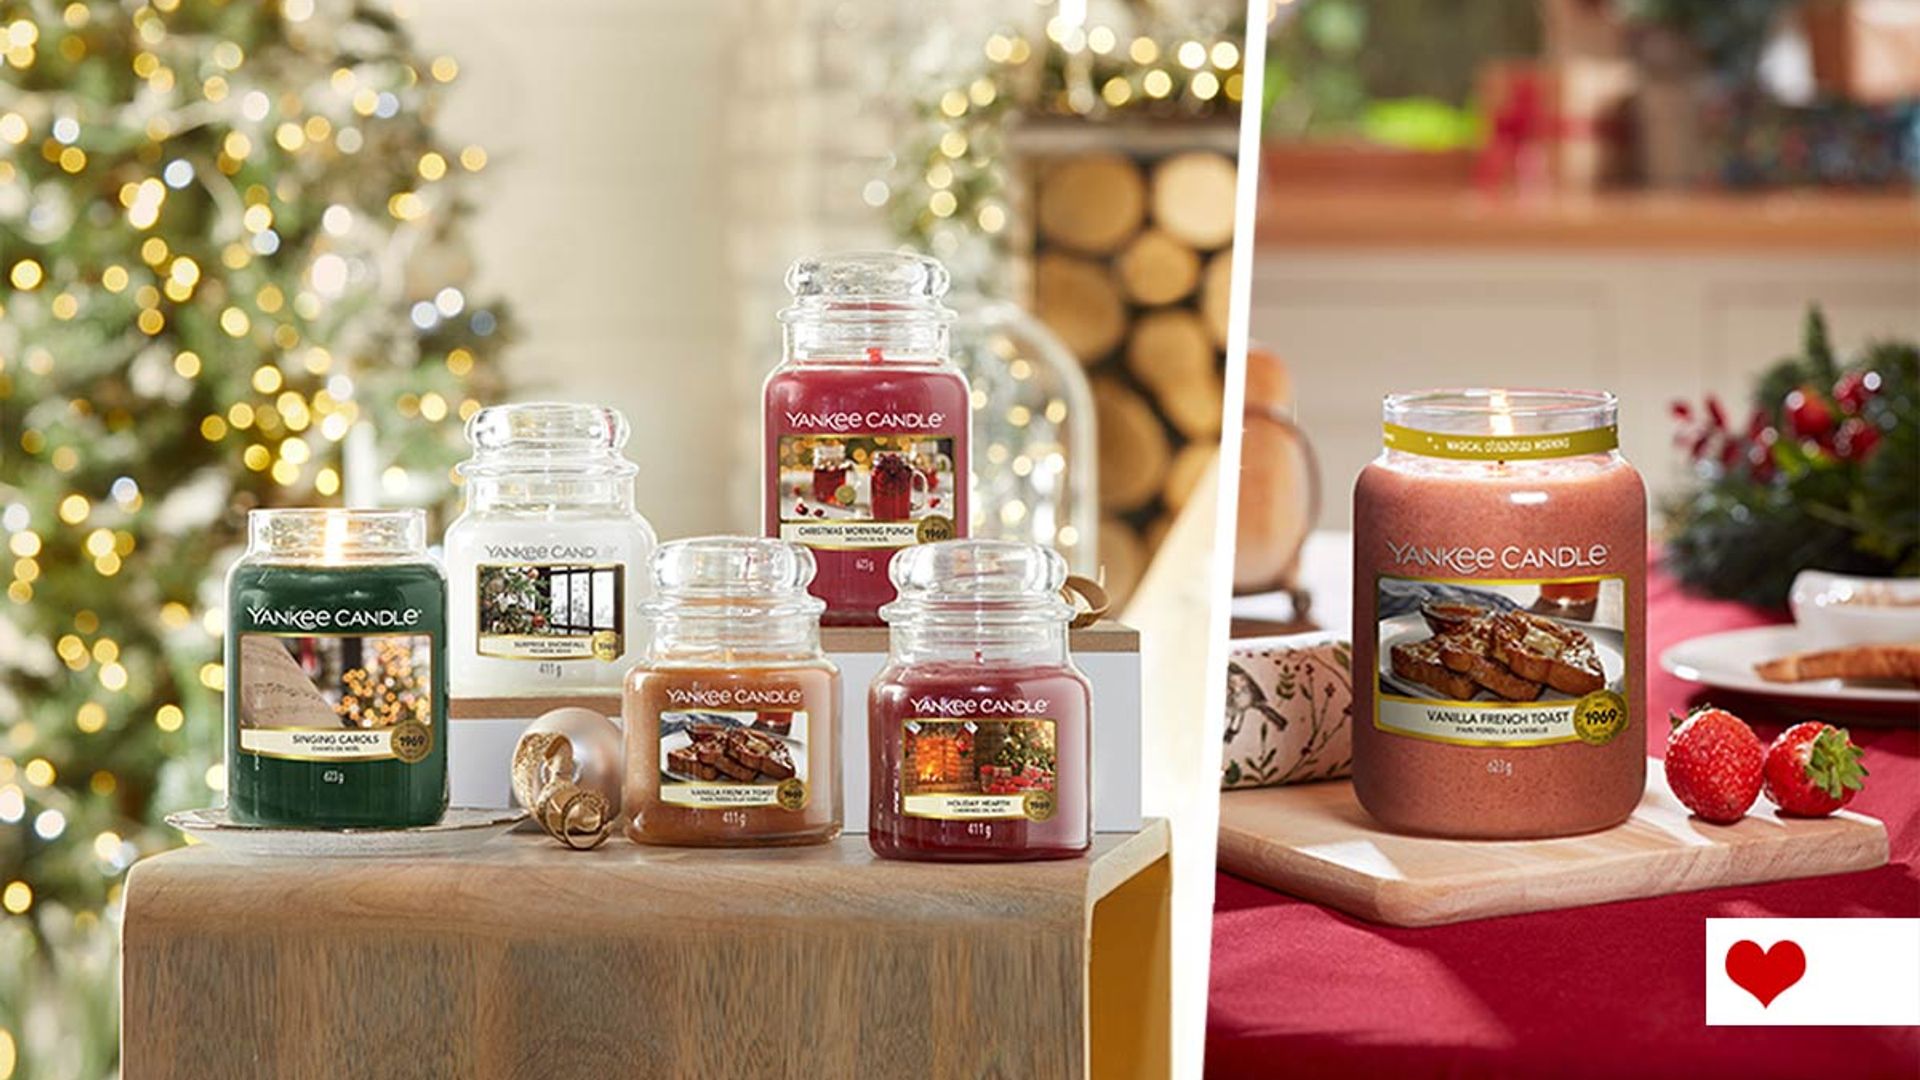 The Yankee Candle Christmas scents are in the Black Friday sale